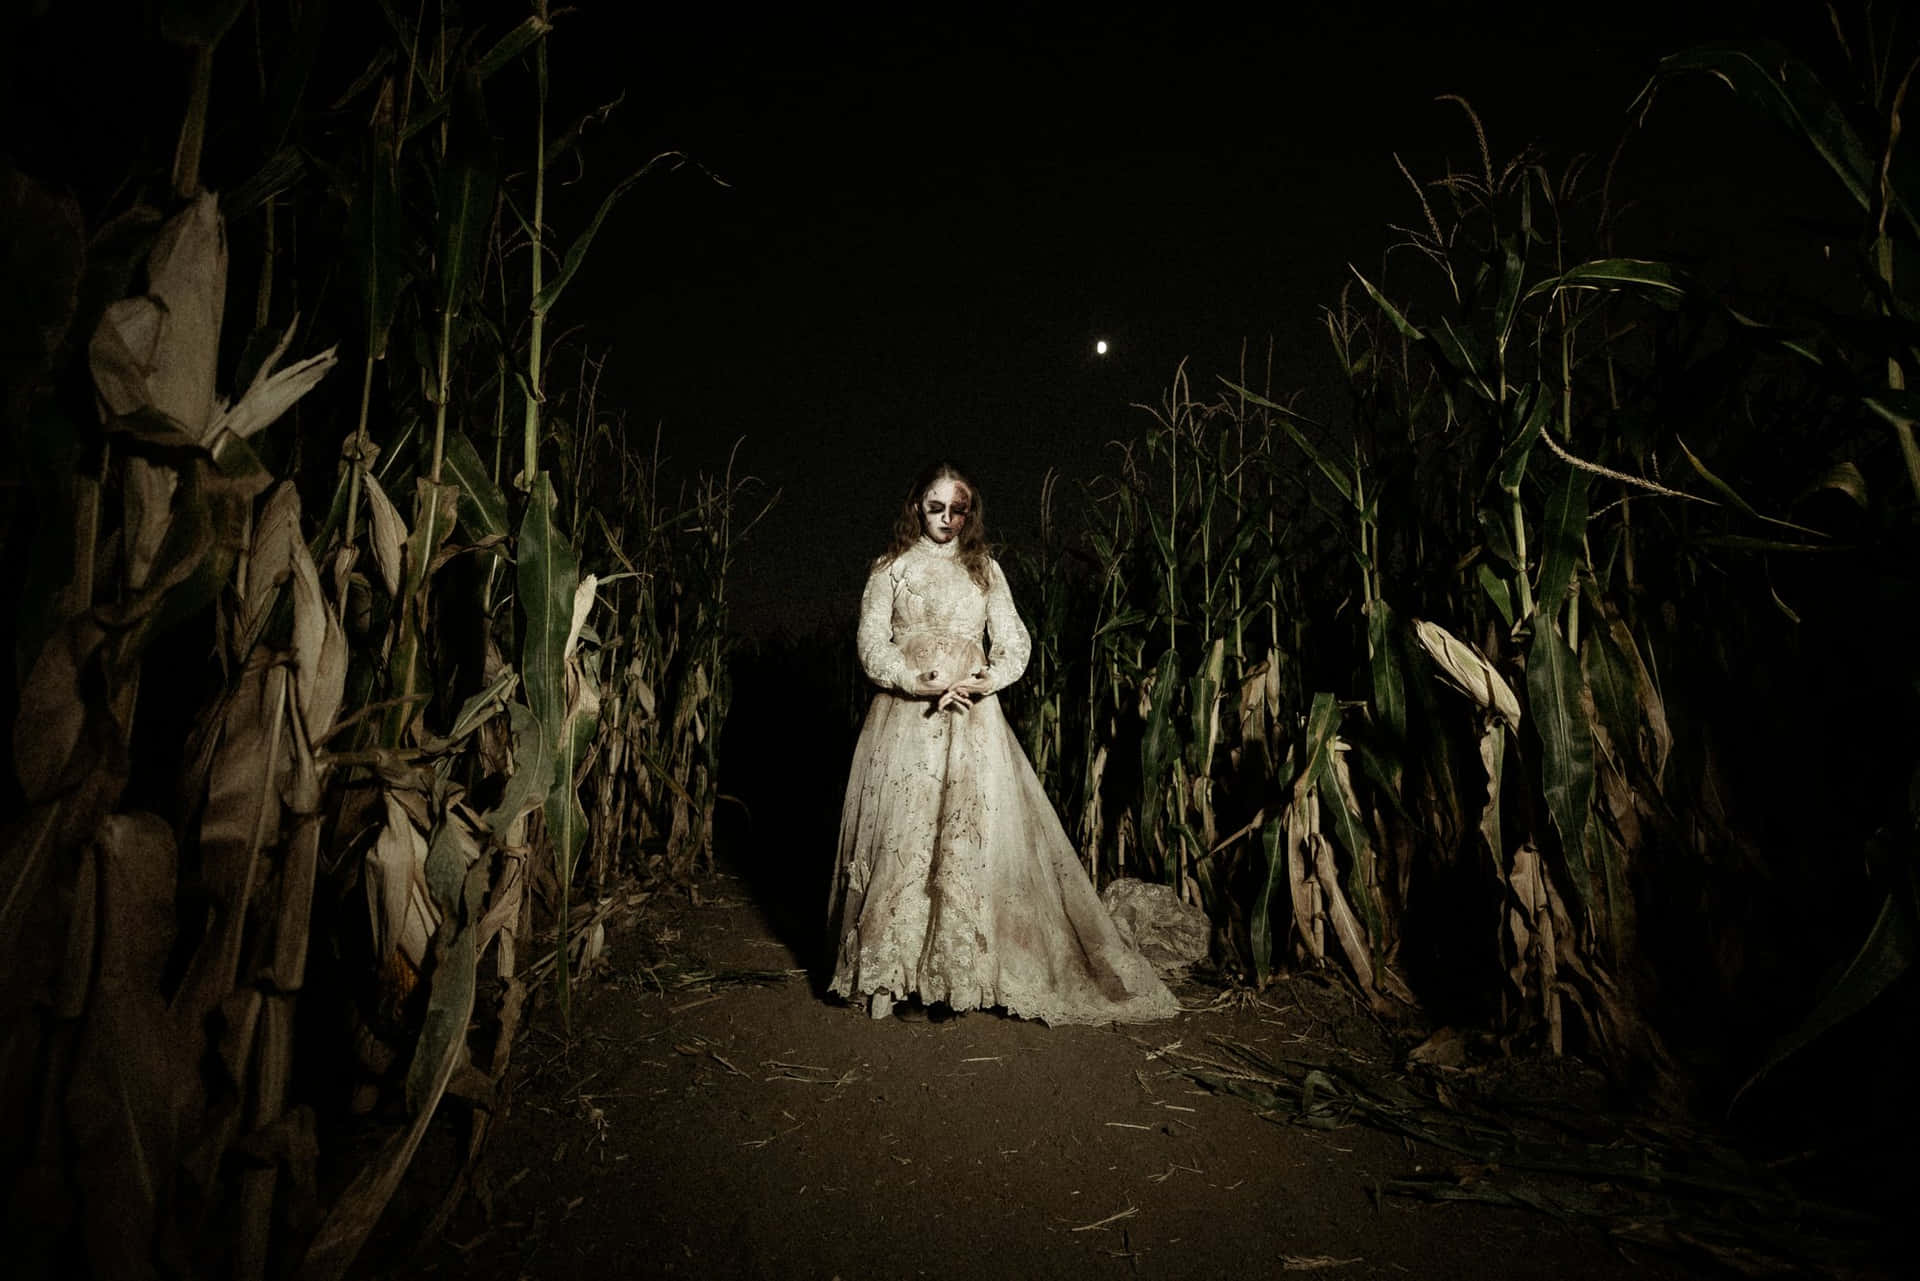 Find your way through acres of haunted corn mazes this Halloween season Wallpaper